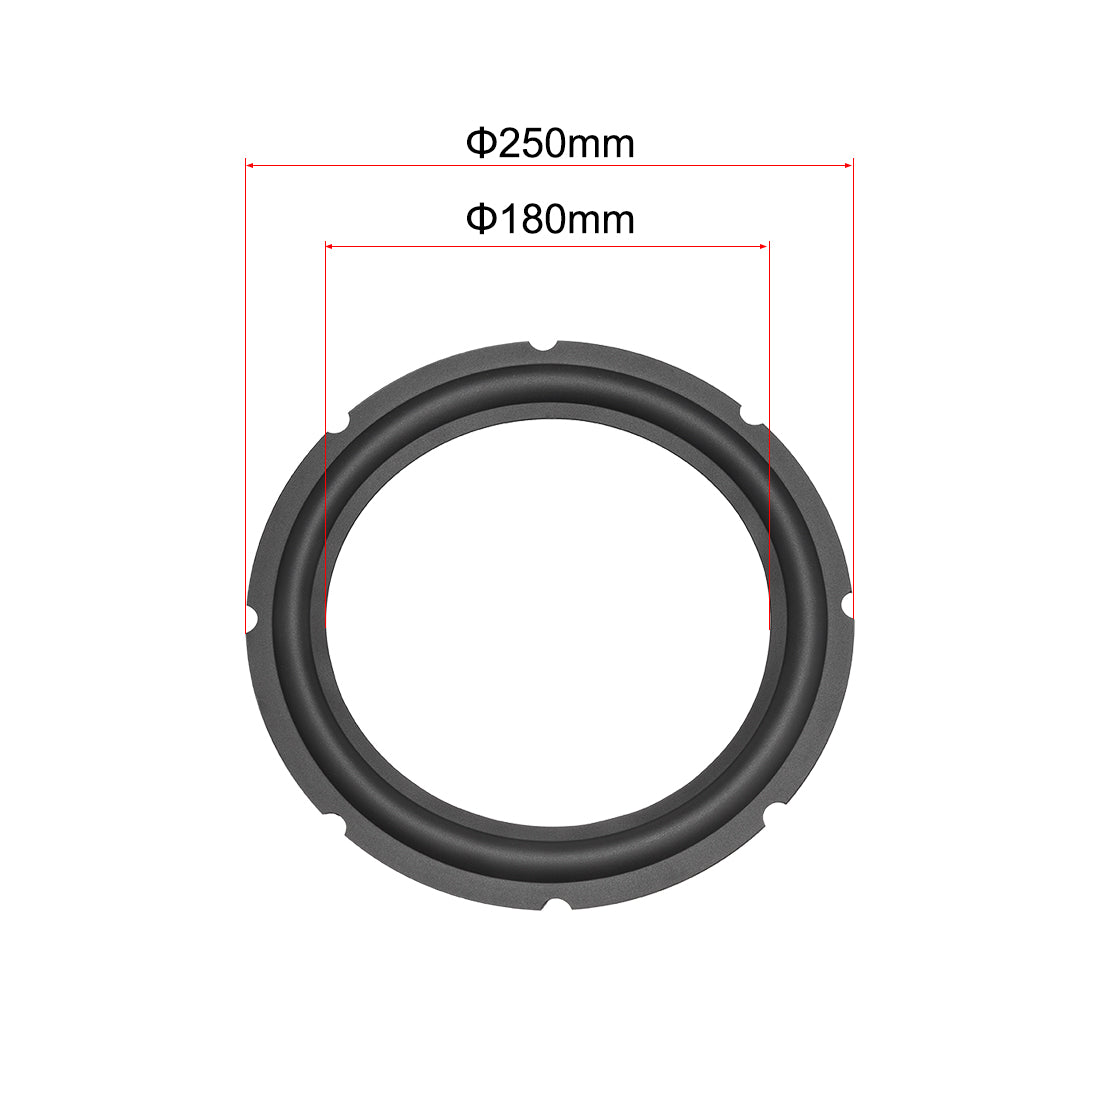 uxcell Uxcell 10" 10inch Perforated Rubber Speaker Edge Surround Rings Replacement Part for Speaker Repair or DIY 2pcs